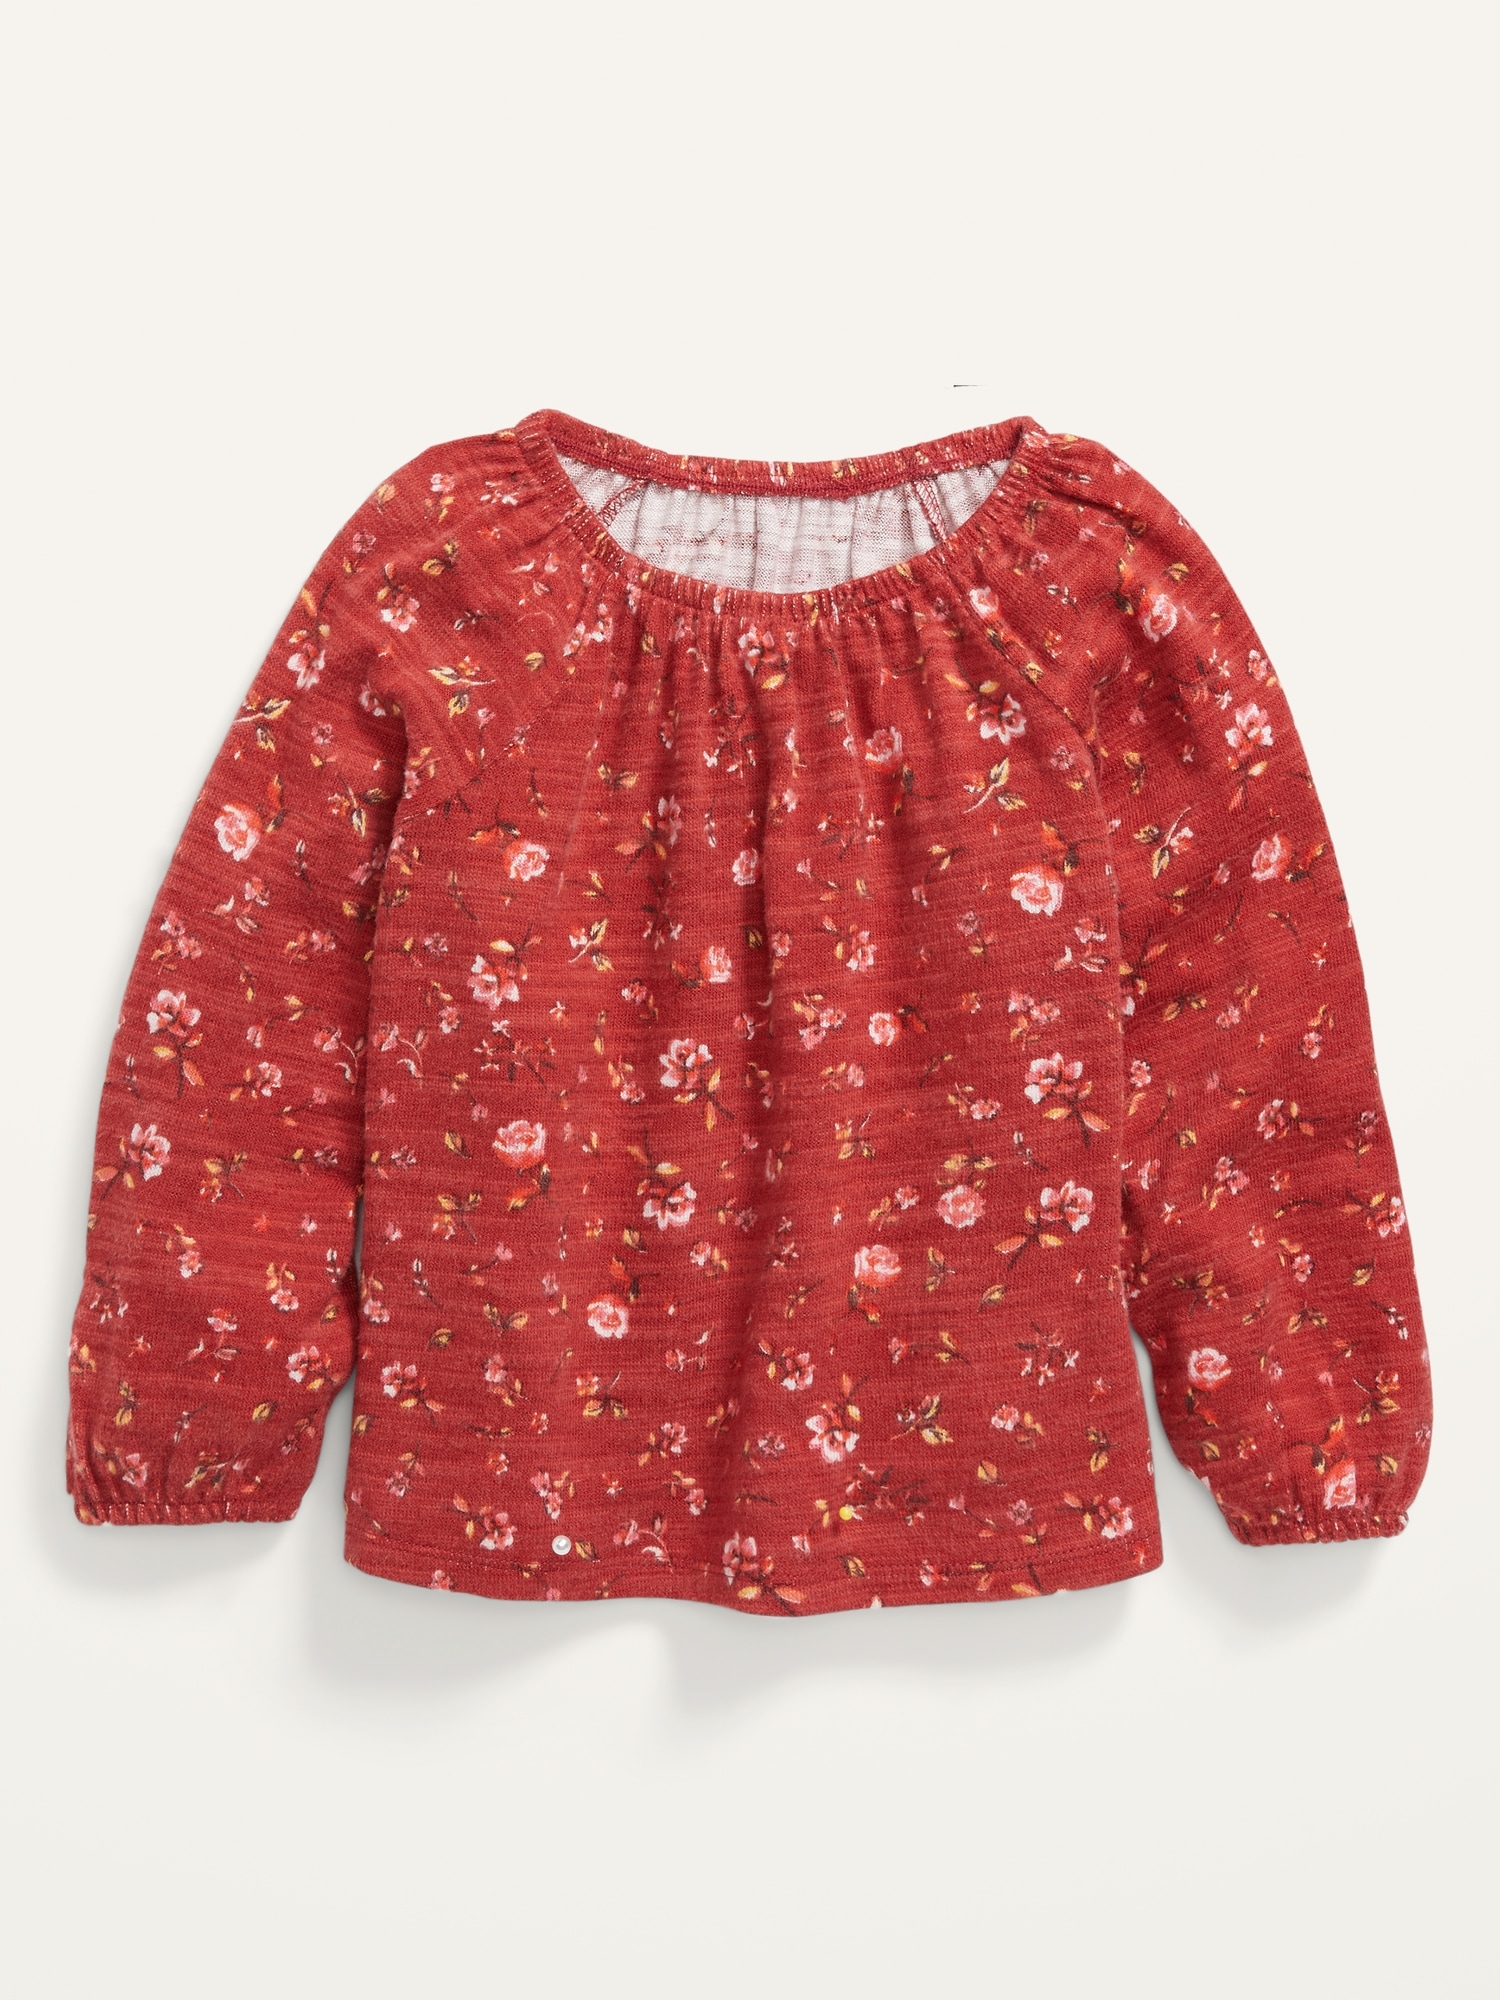 Long-Sleeve Plush-Knit Floral Top for Toddler Girls